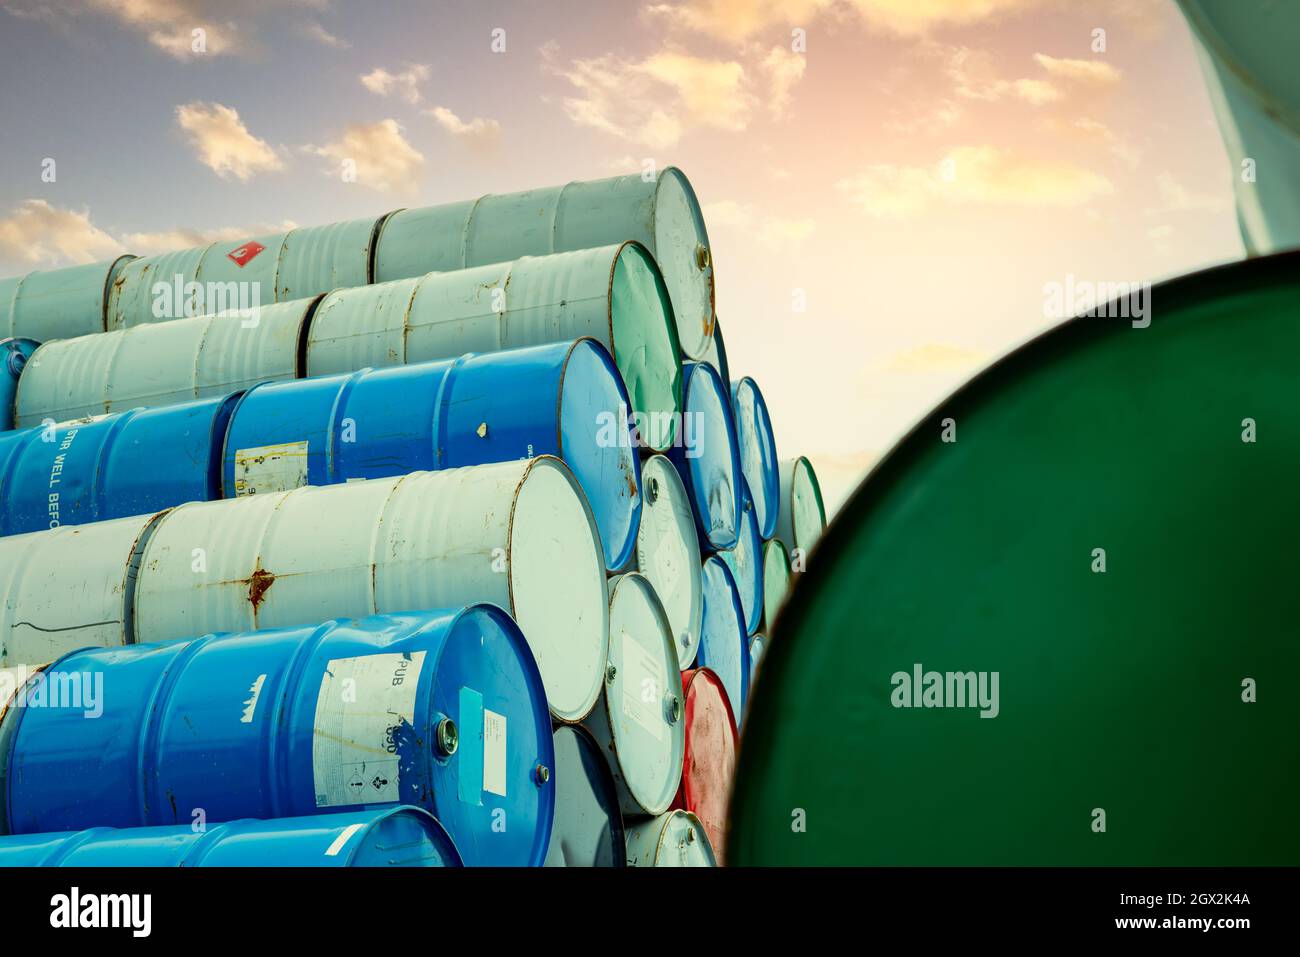 Old chemical barrels stack. Red, green, and blue chemical drum. Steel tank of flammable liquid. Hazard chemical barrel. Industrial waste. Empty Stock Photo